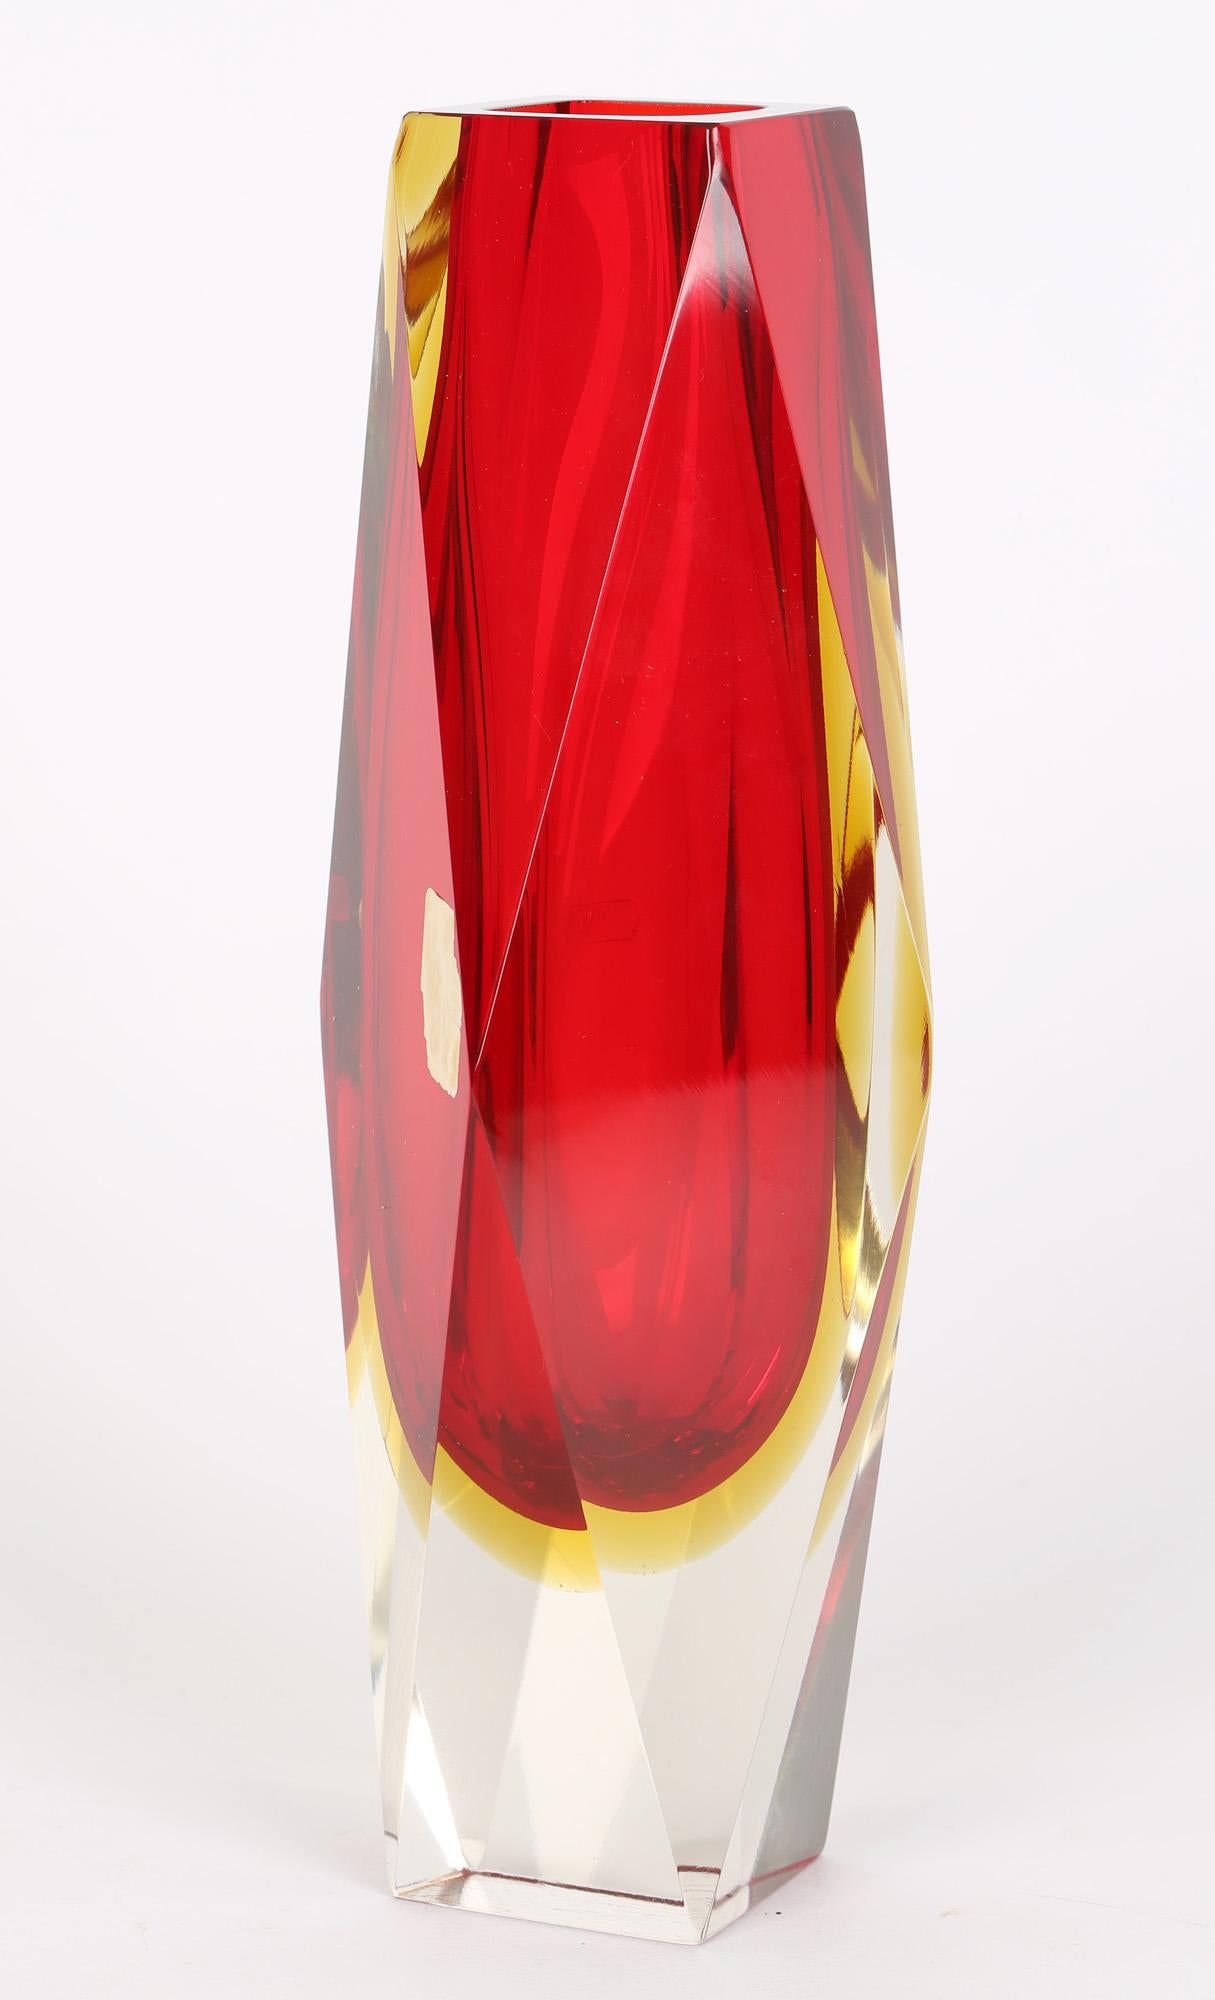 Pagnin & Bon Italian Murano Red and Yellow Sommerso Facet Cut Glass Vase For Sale 3